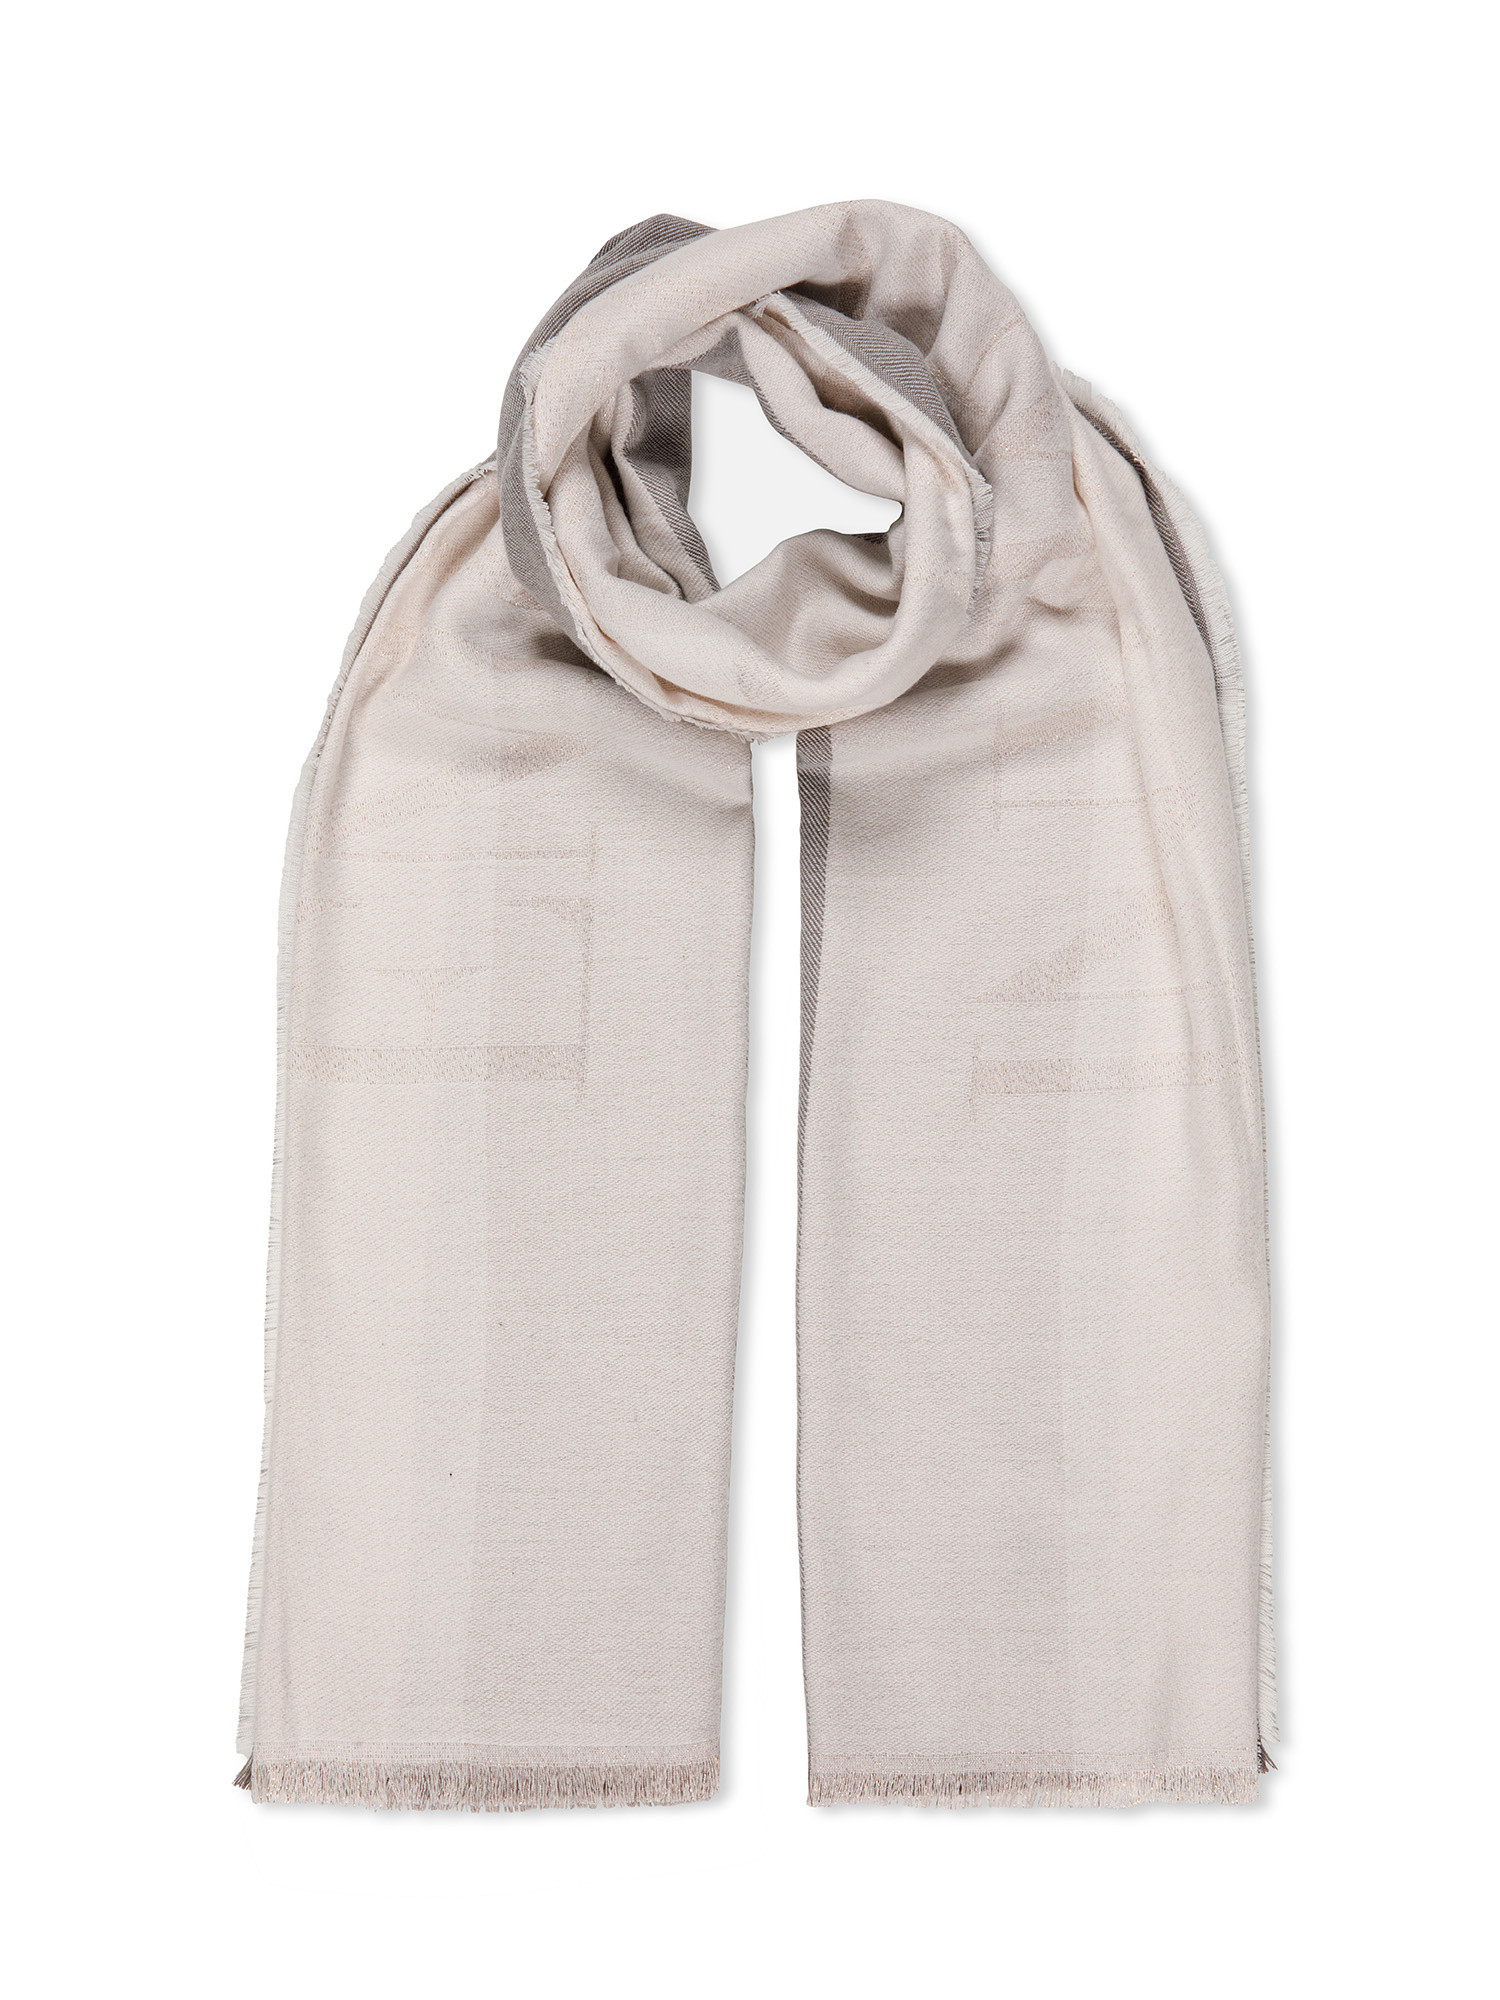 Emporio Armani - Striped stole with logo, Dove Grey, large image number 0